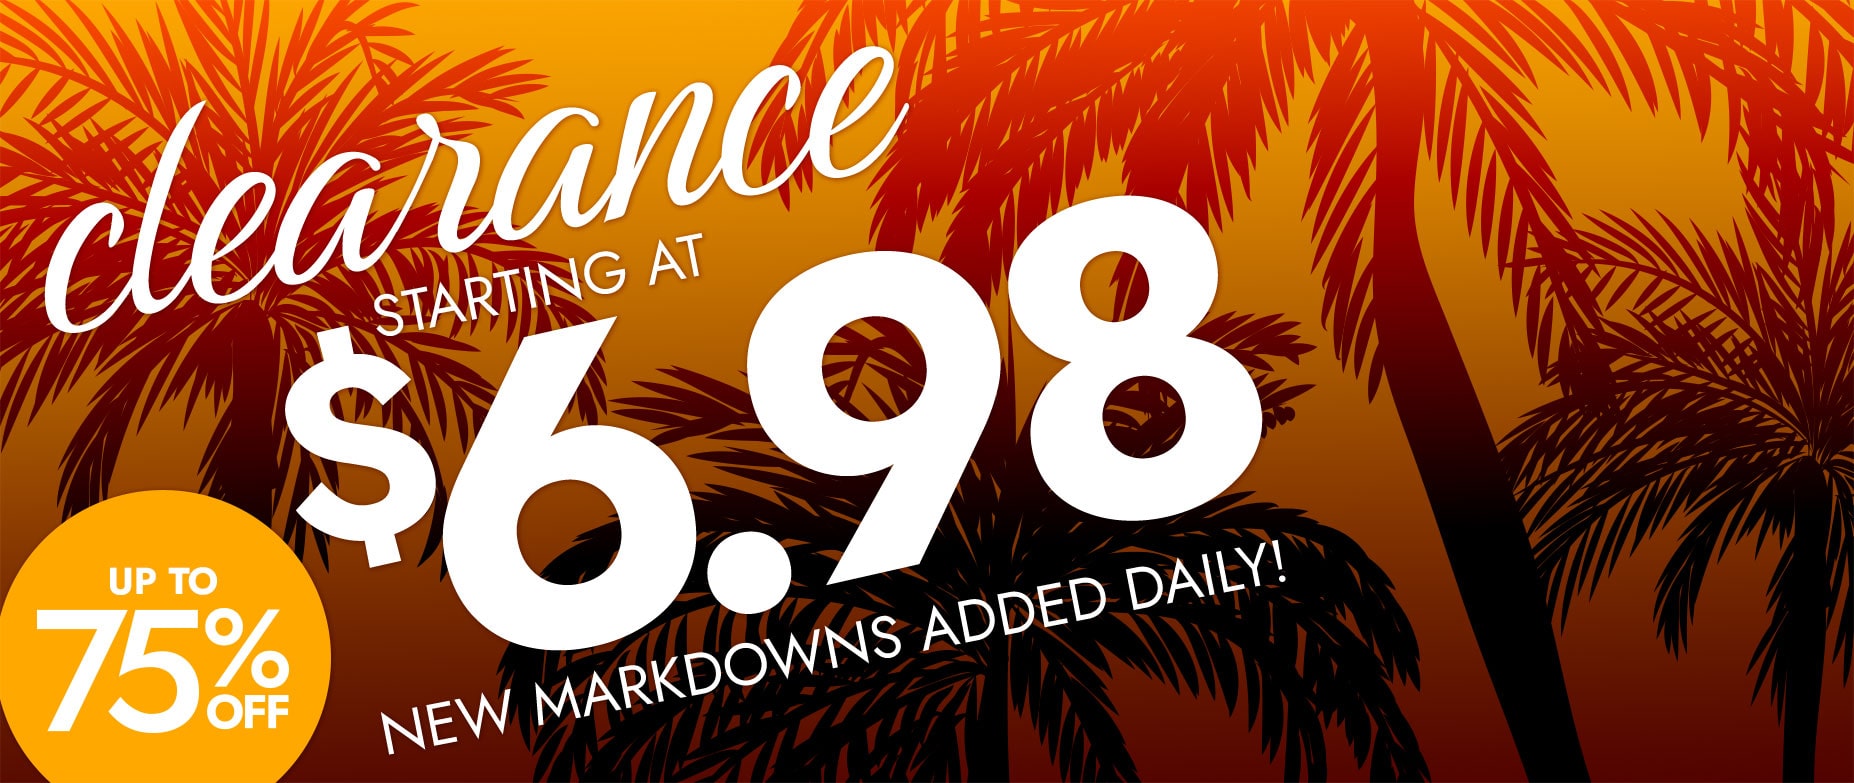 Clearance starting at $6.98 new markdowns added daily